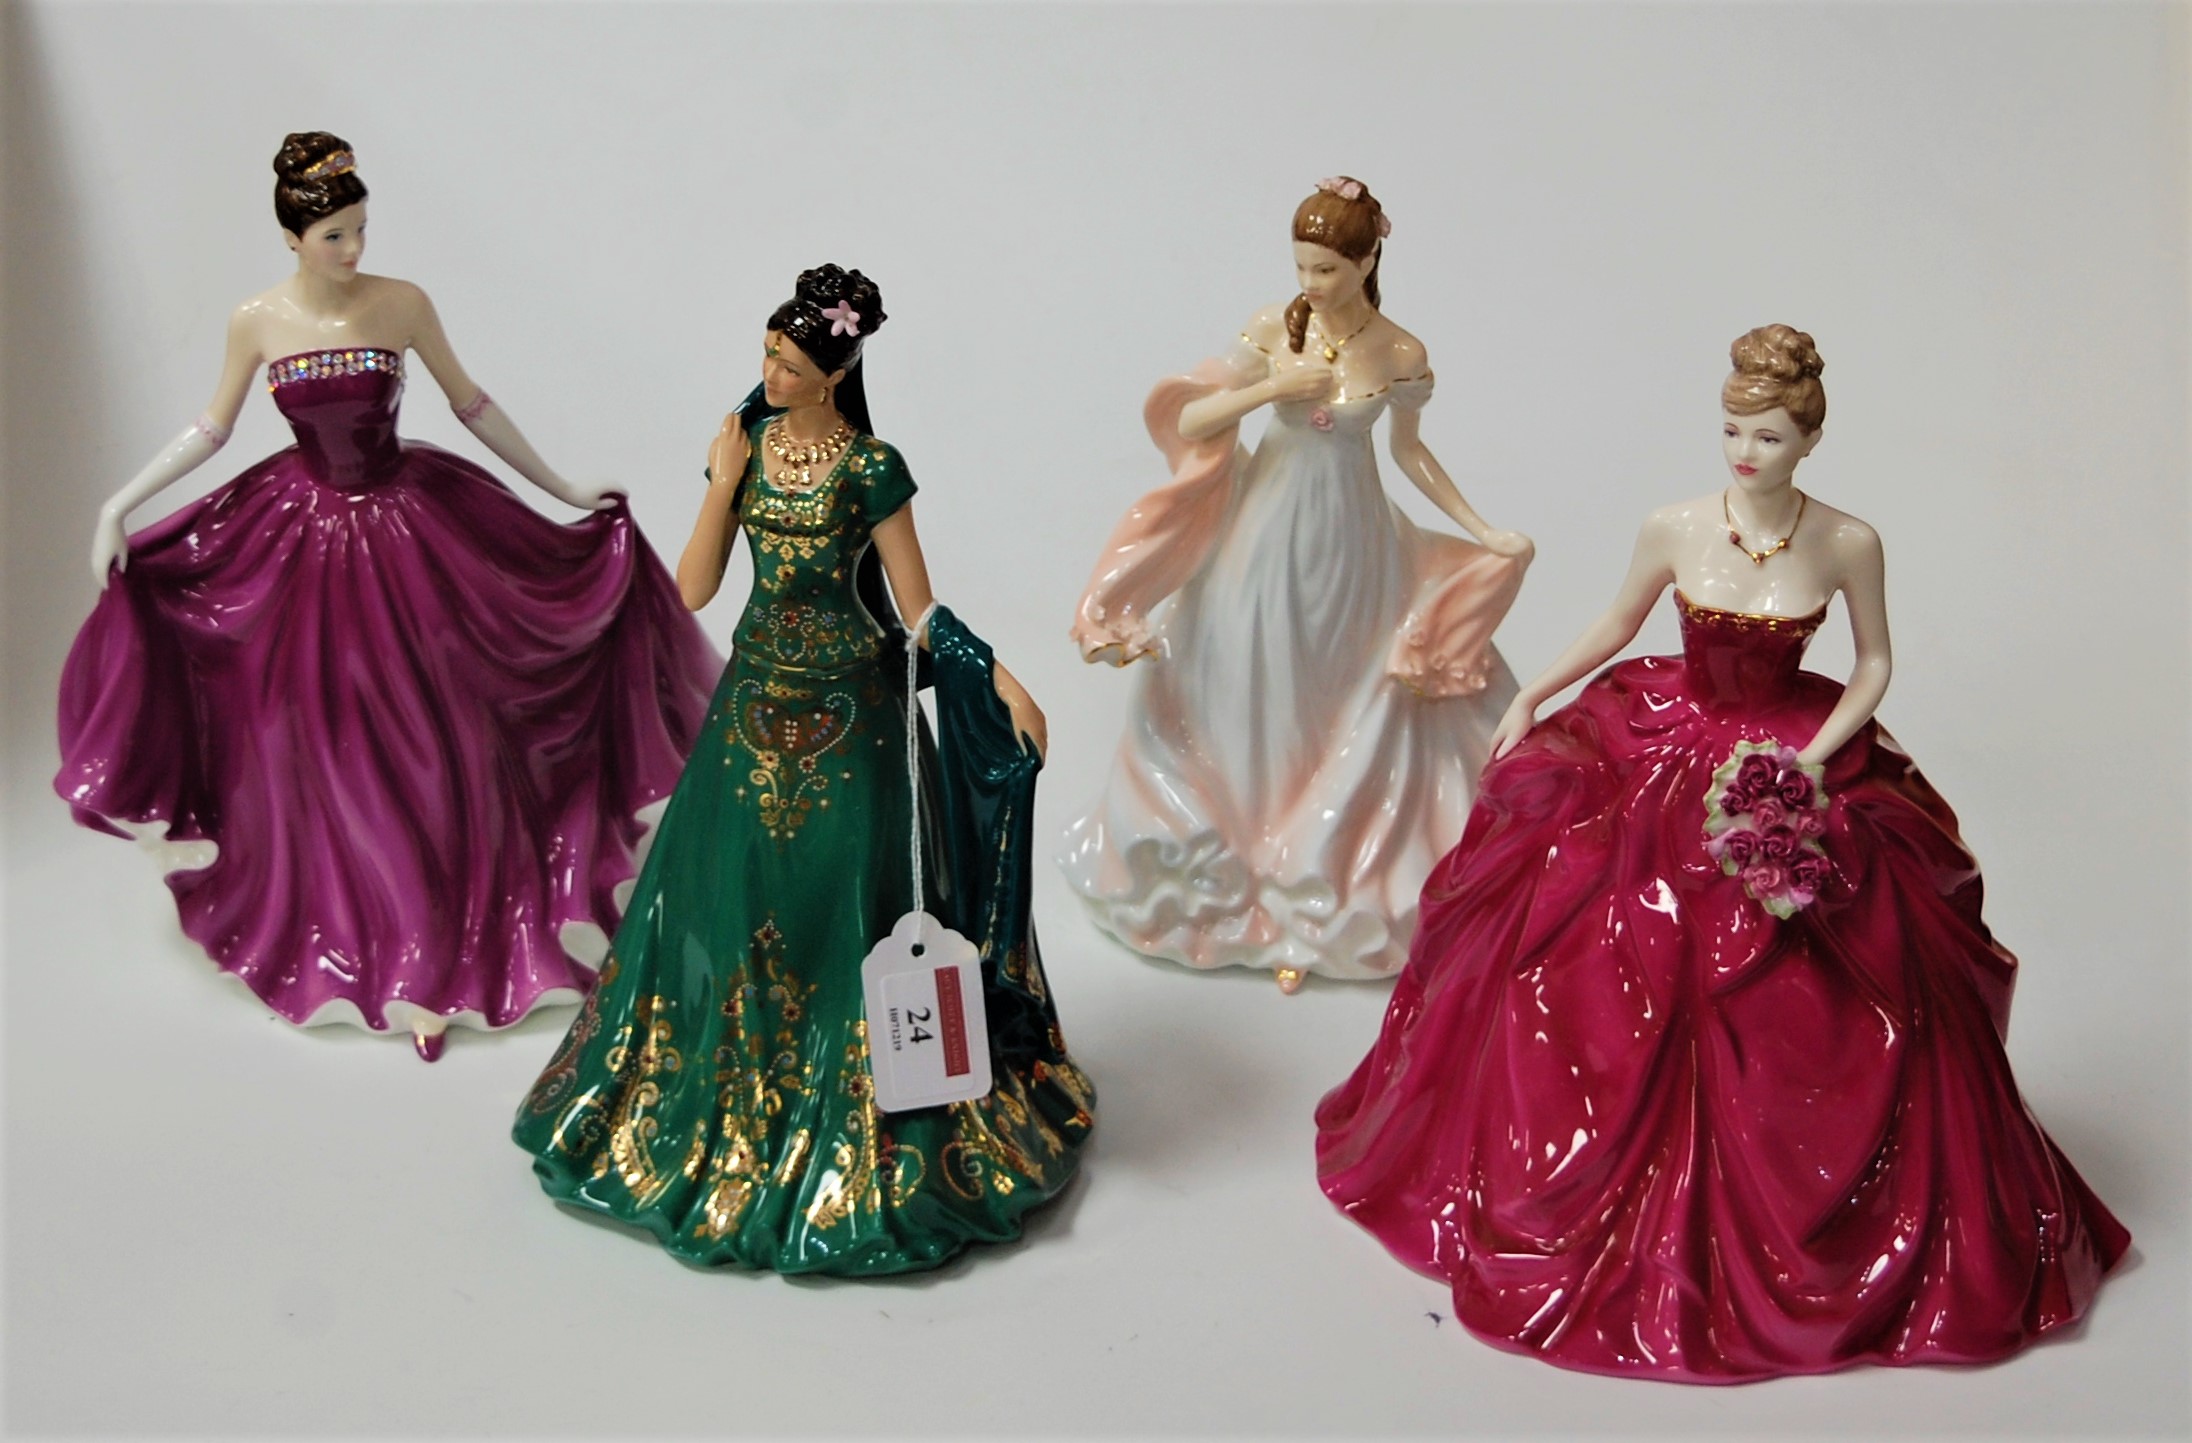 Three Royal Worcester figurines to include 'The Emerald Princess', 'Crystal Princess', and 'With all